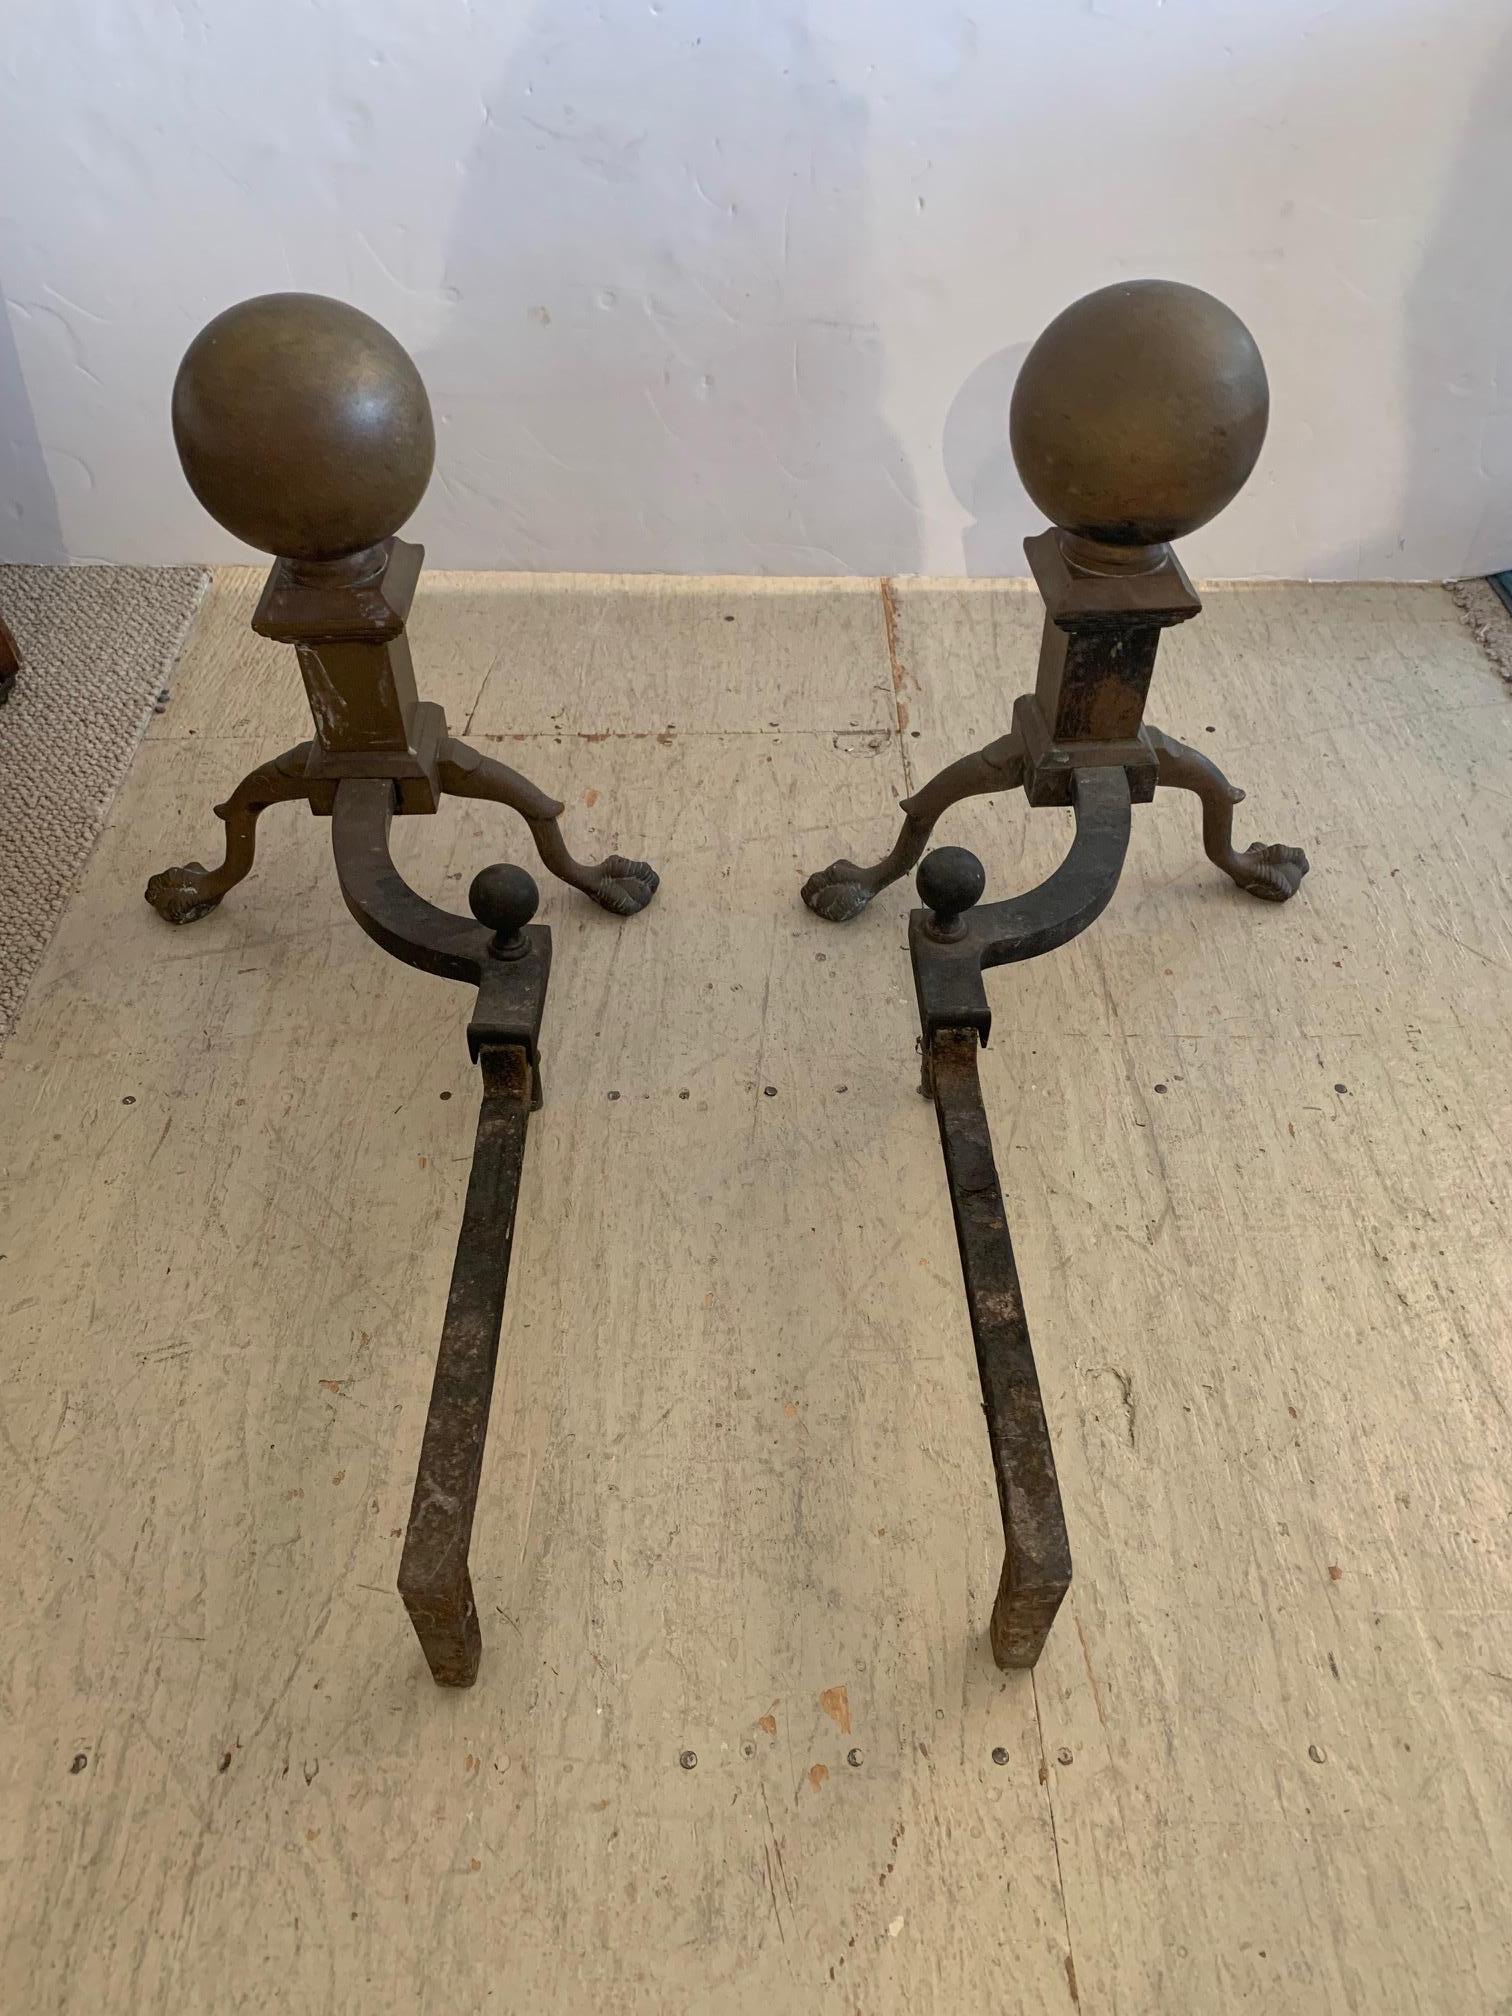 Handsome pair of antique brass and iron cannonball design andirons having brass fenders and ball and claw feet.